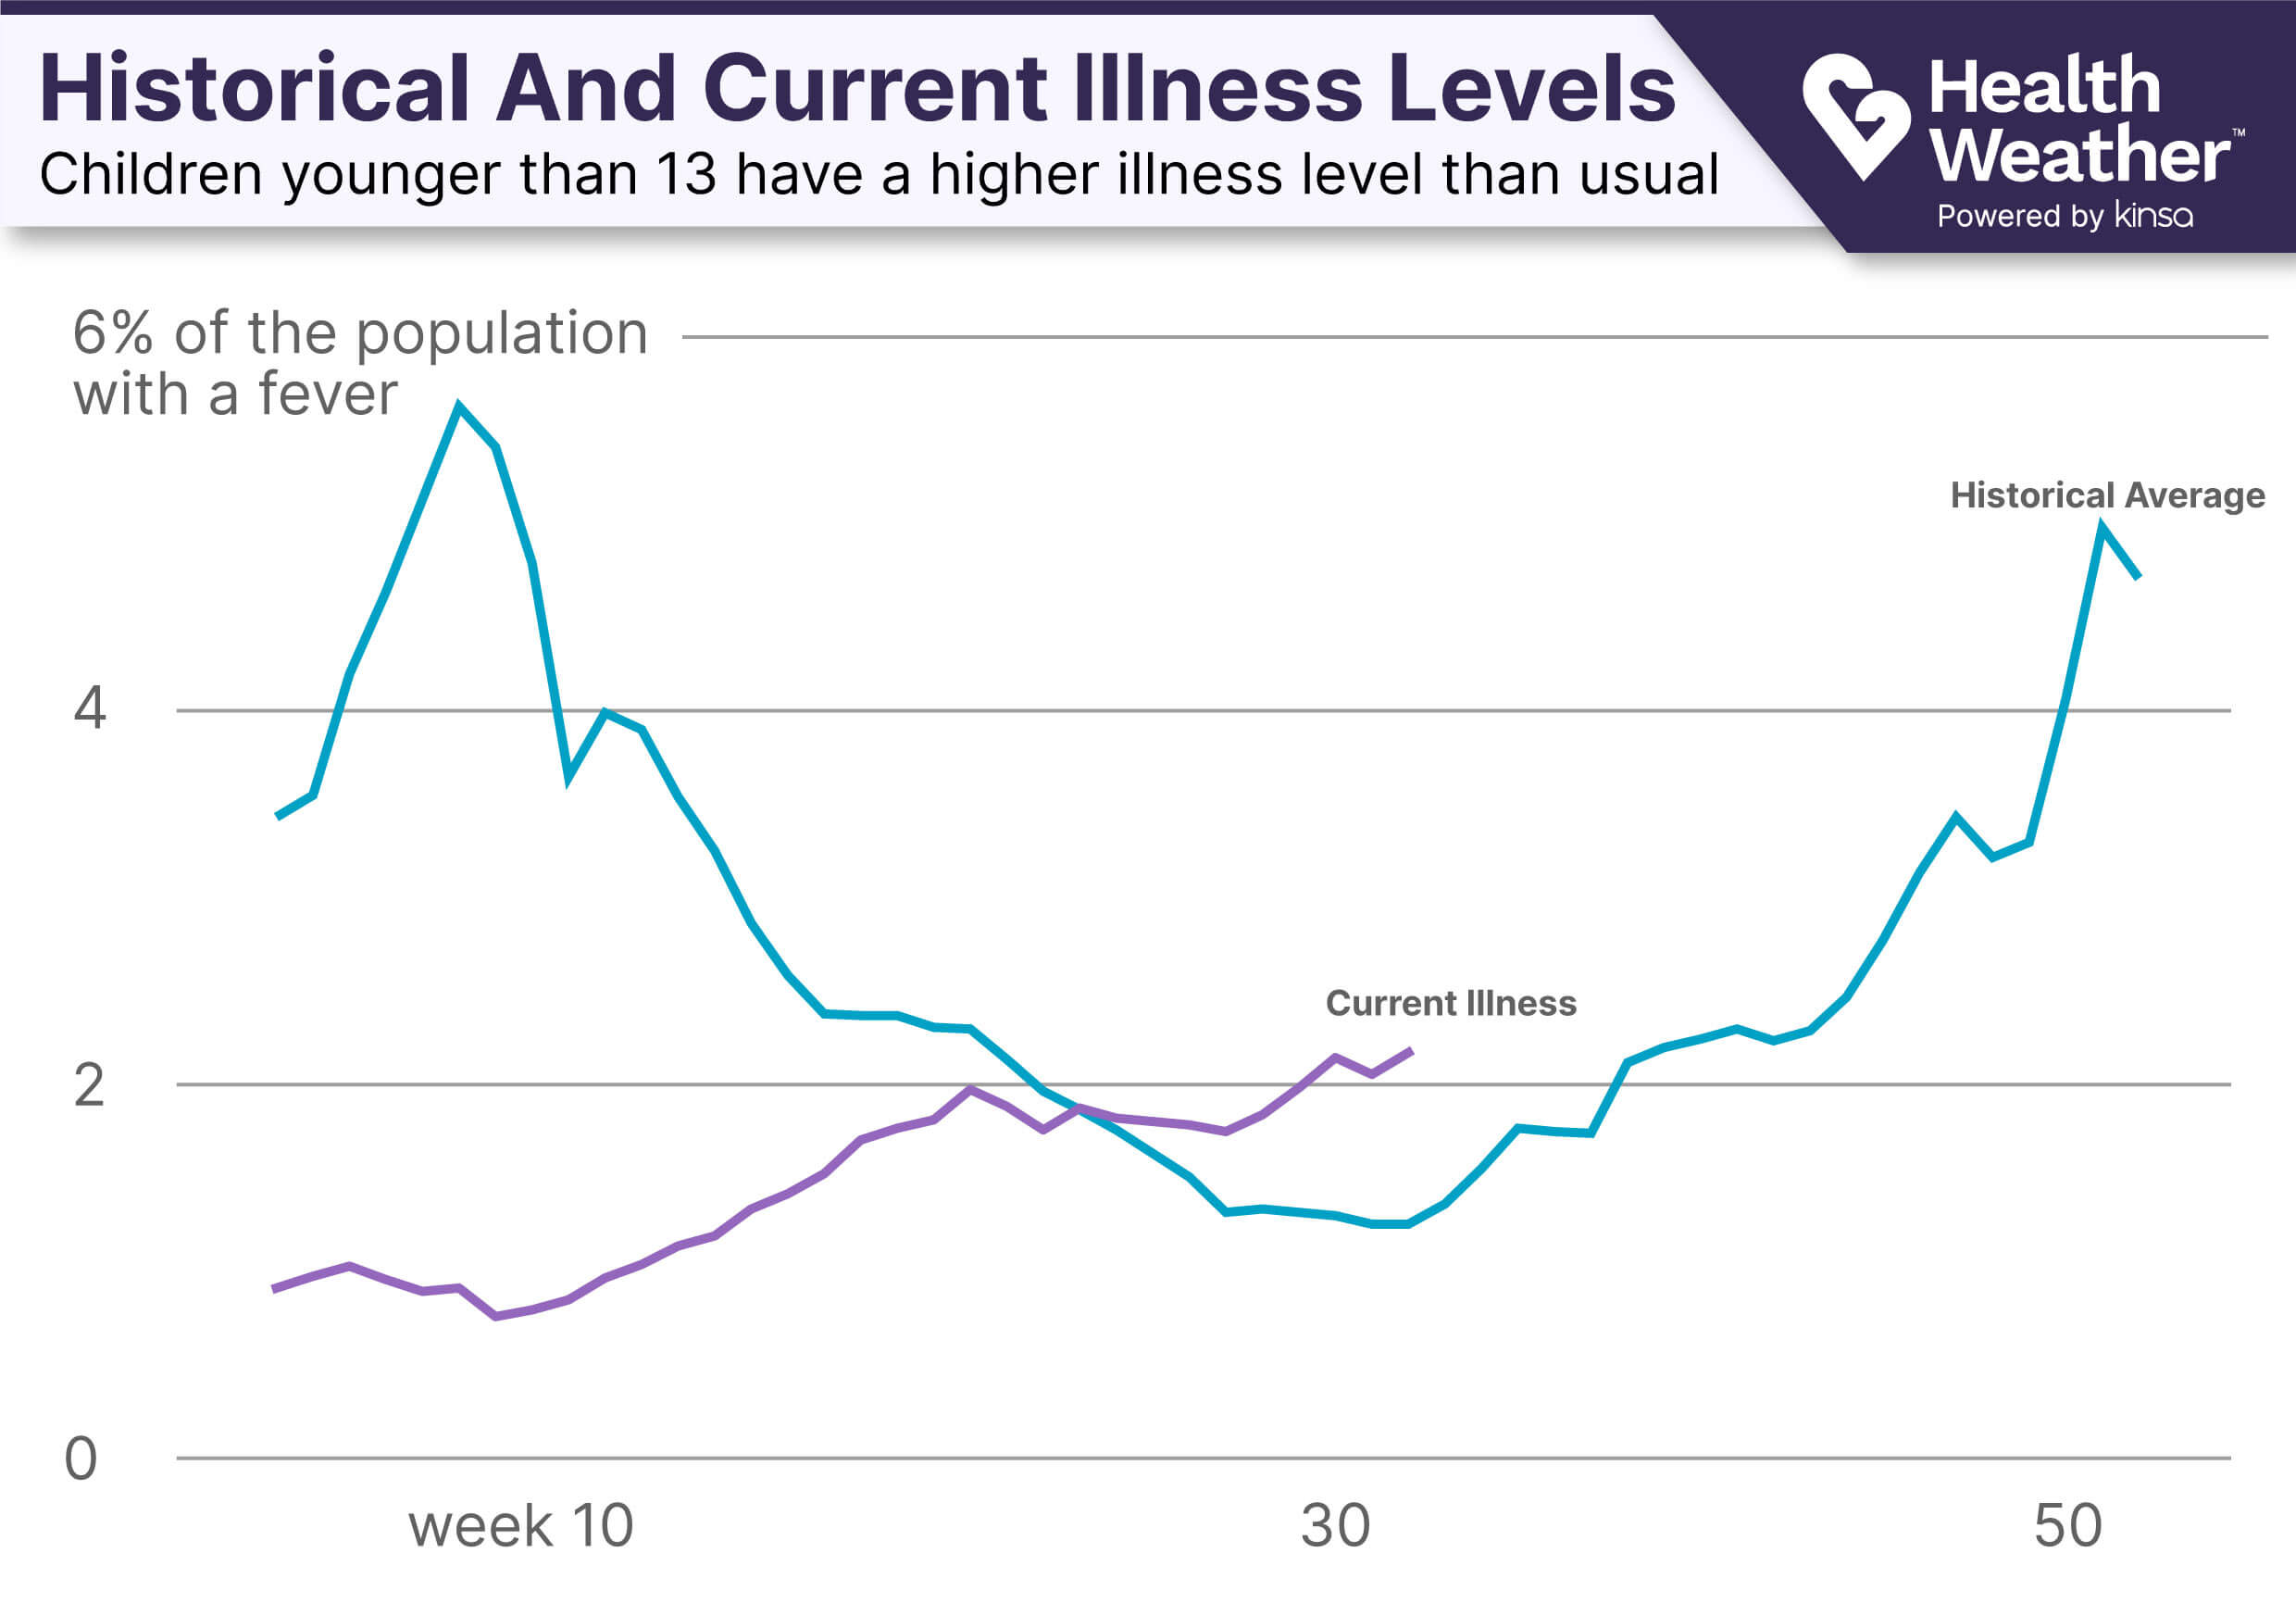 Line chart showing historical illness and current illness level for children younger than 13